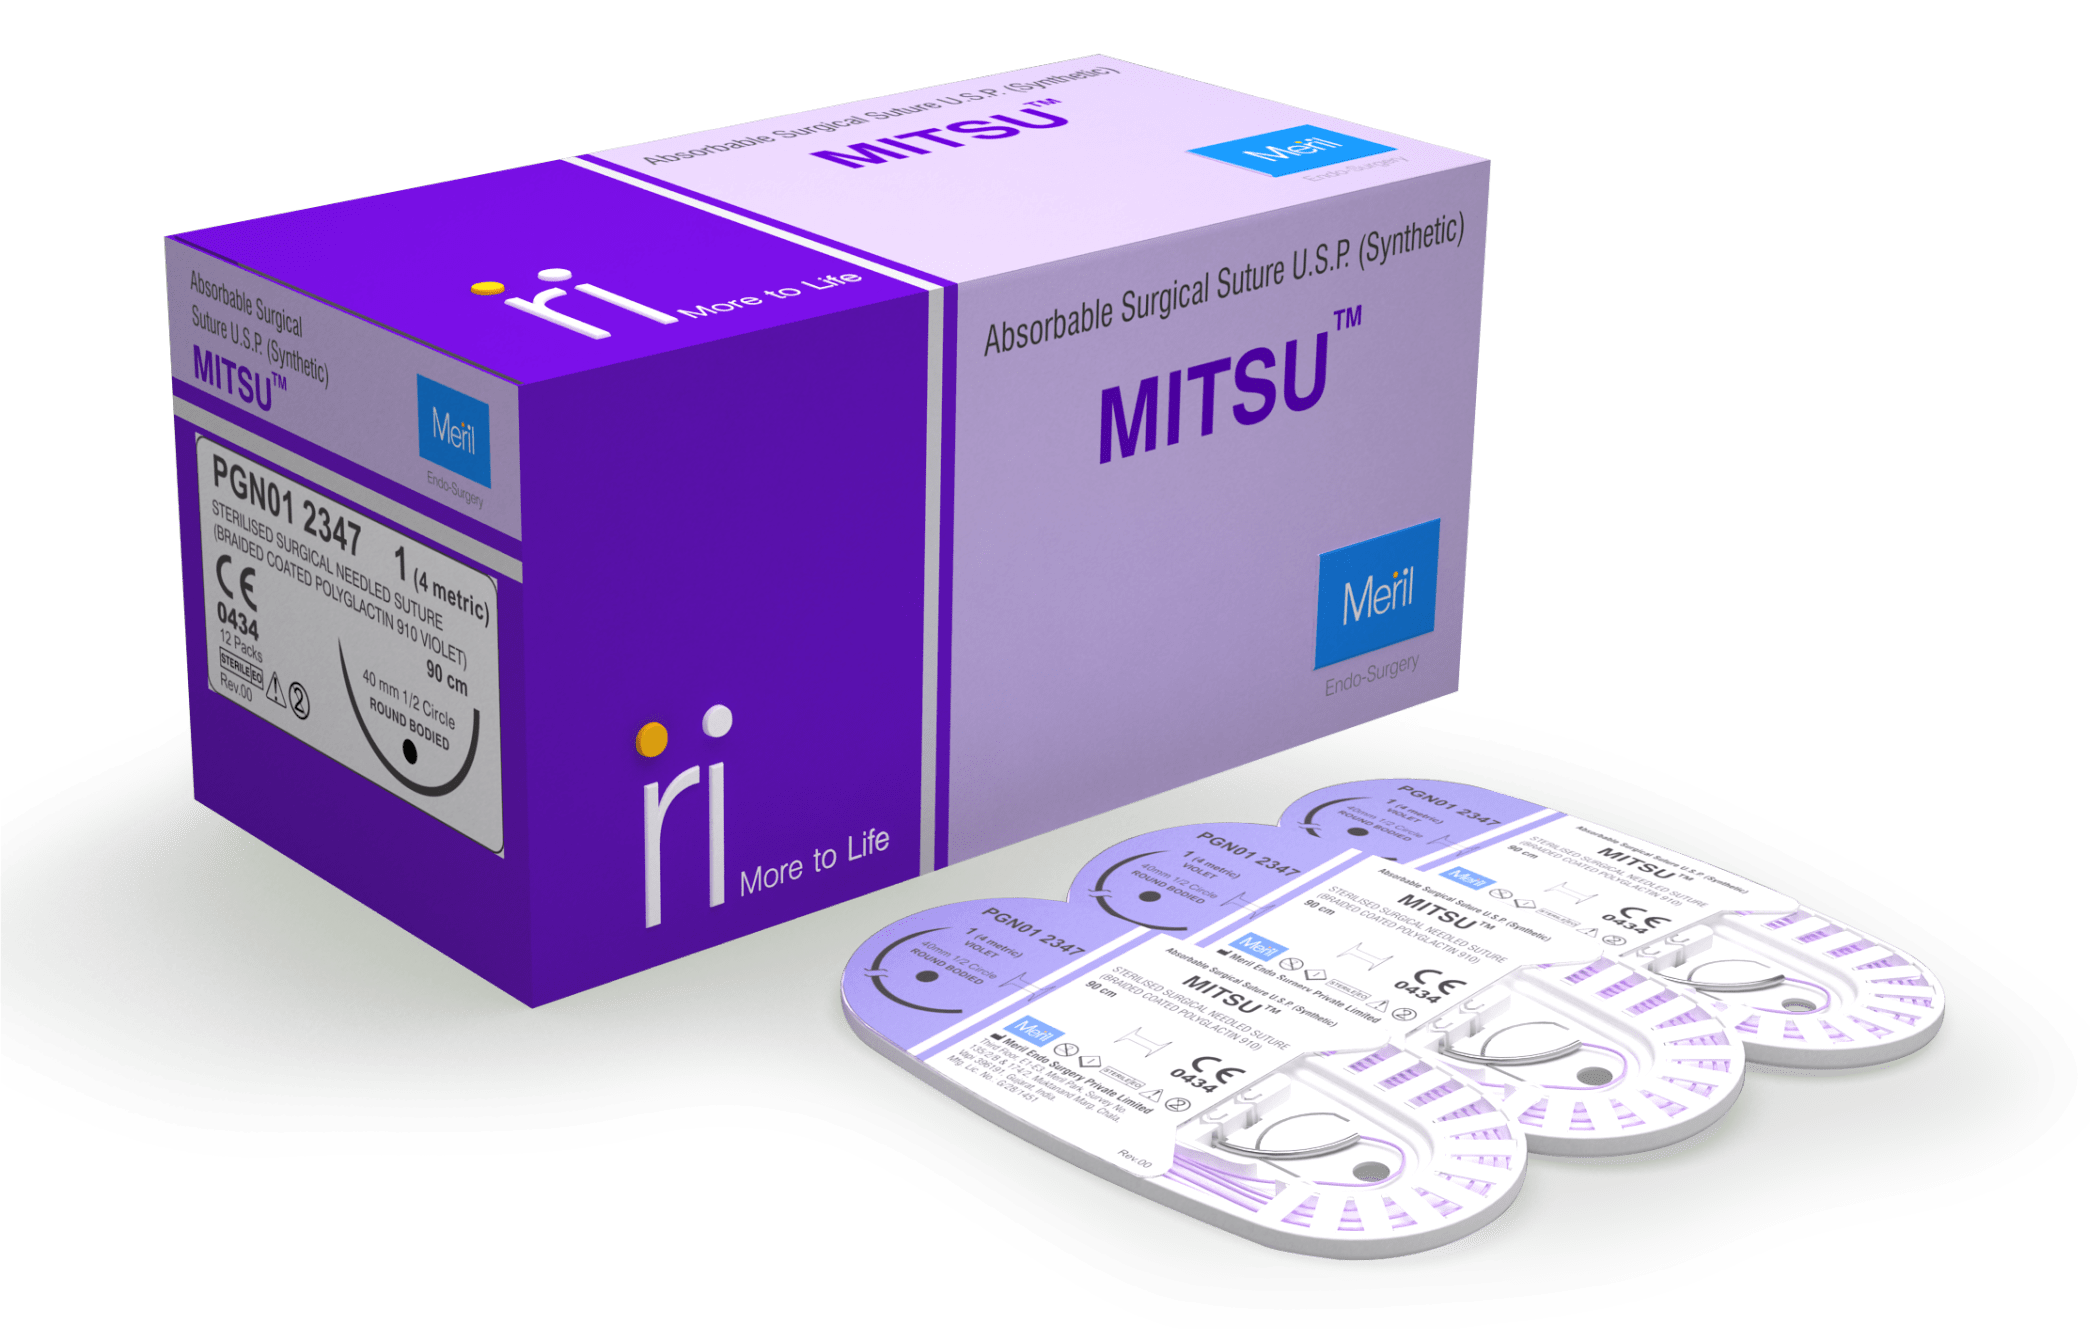 Mitsu - Absorbable Plastic Surgical Suture